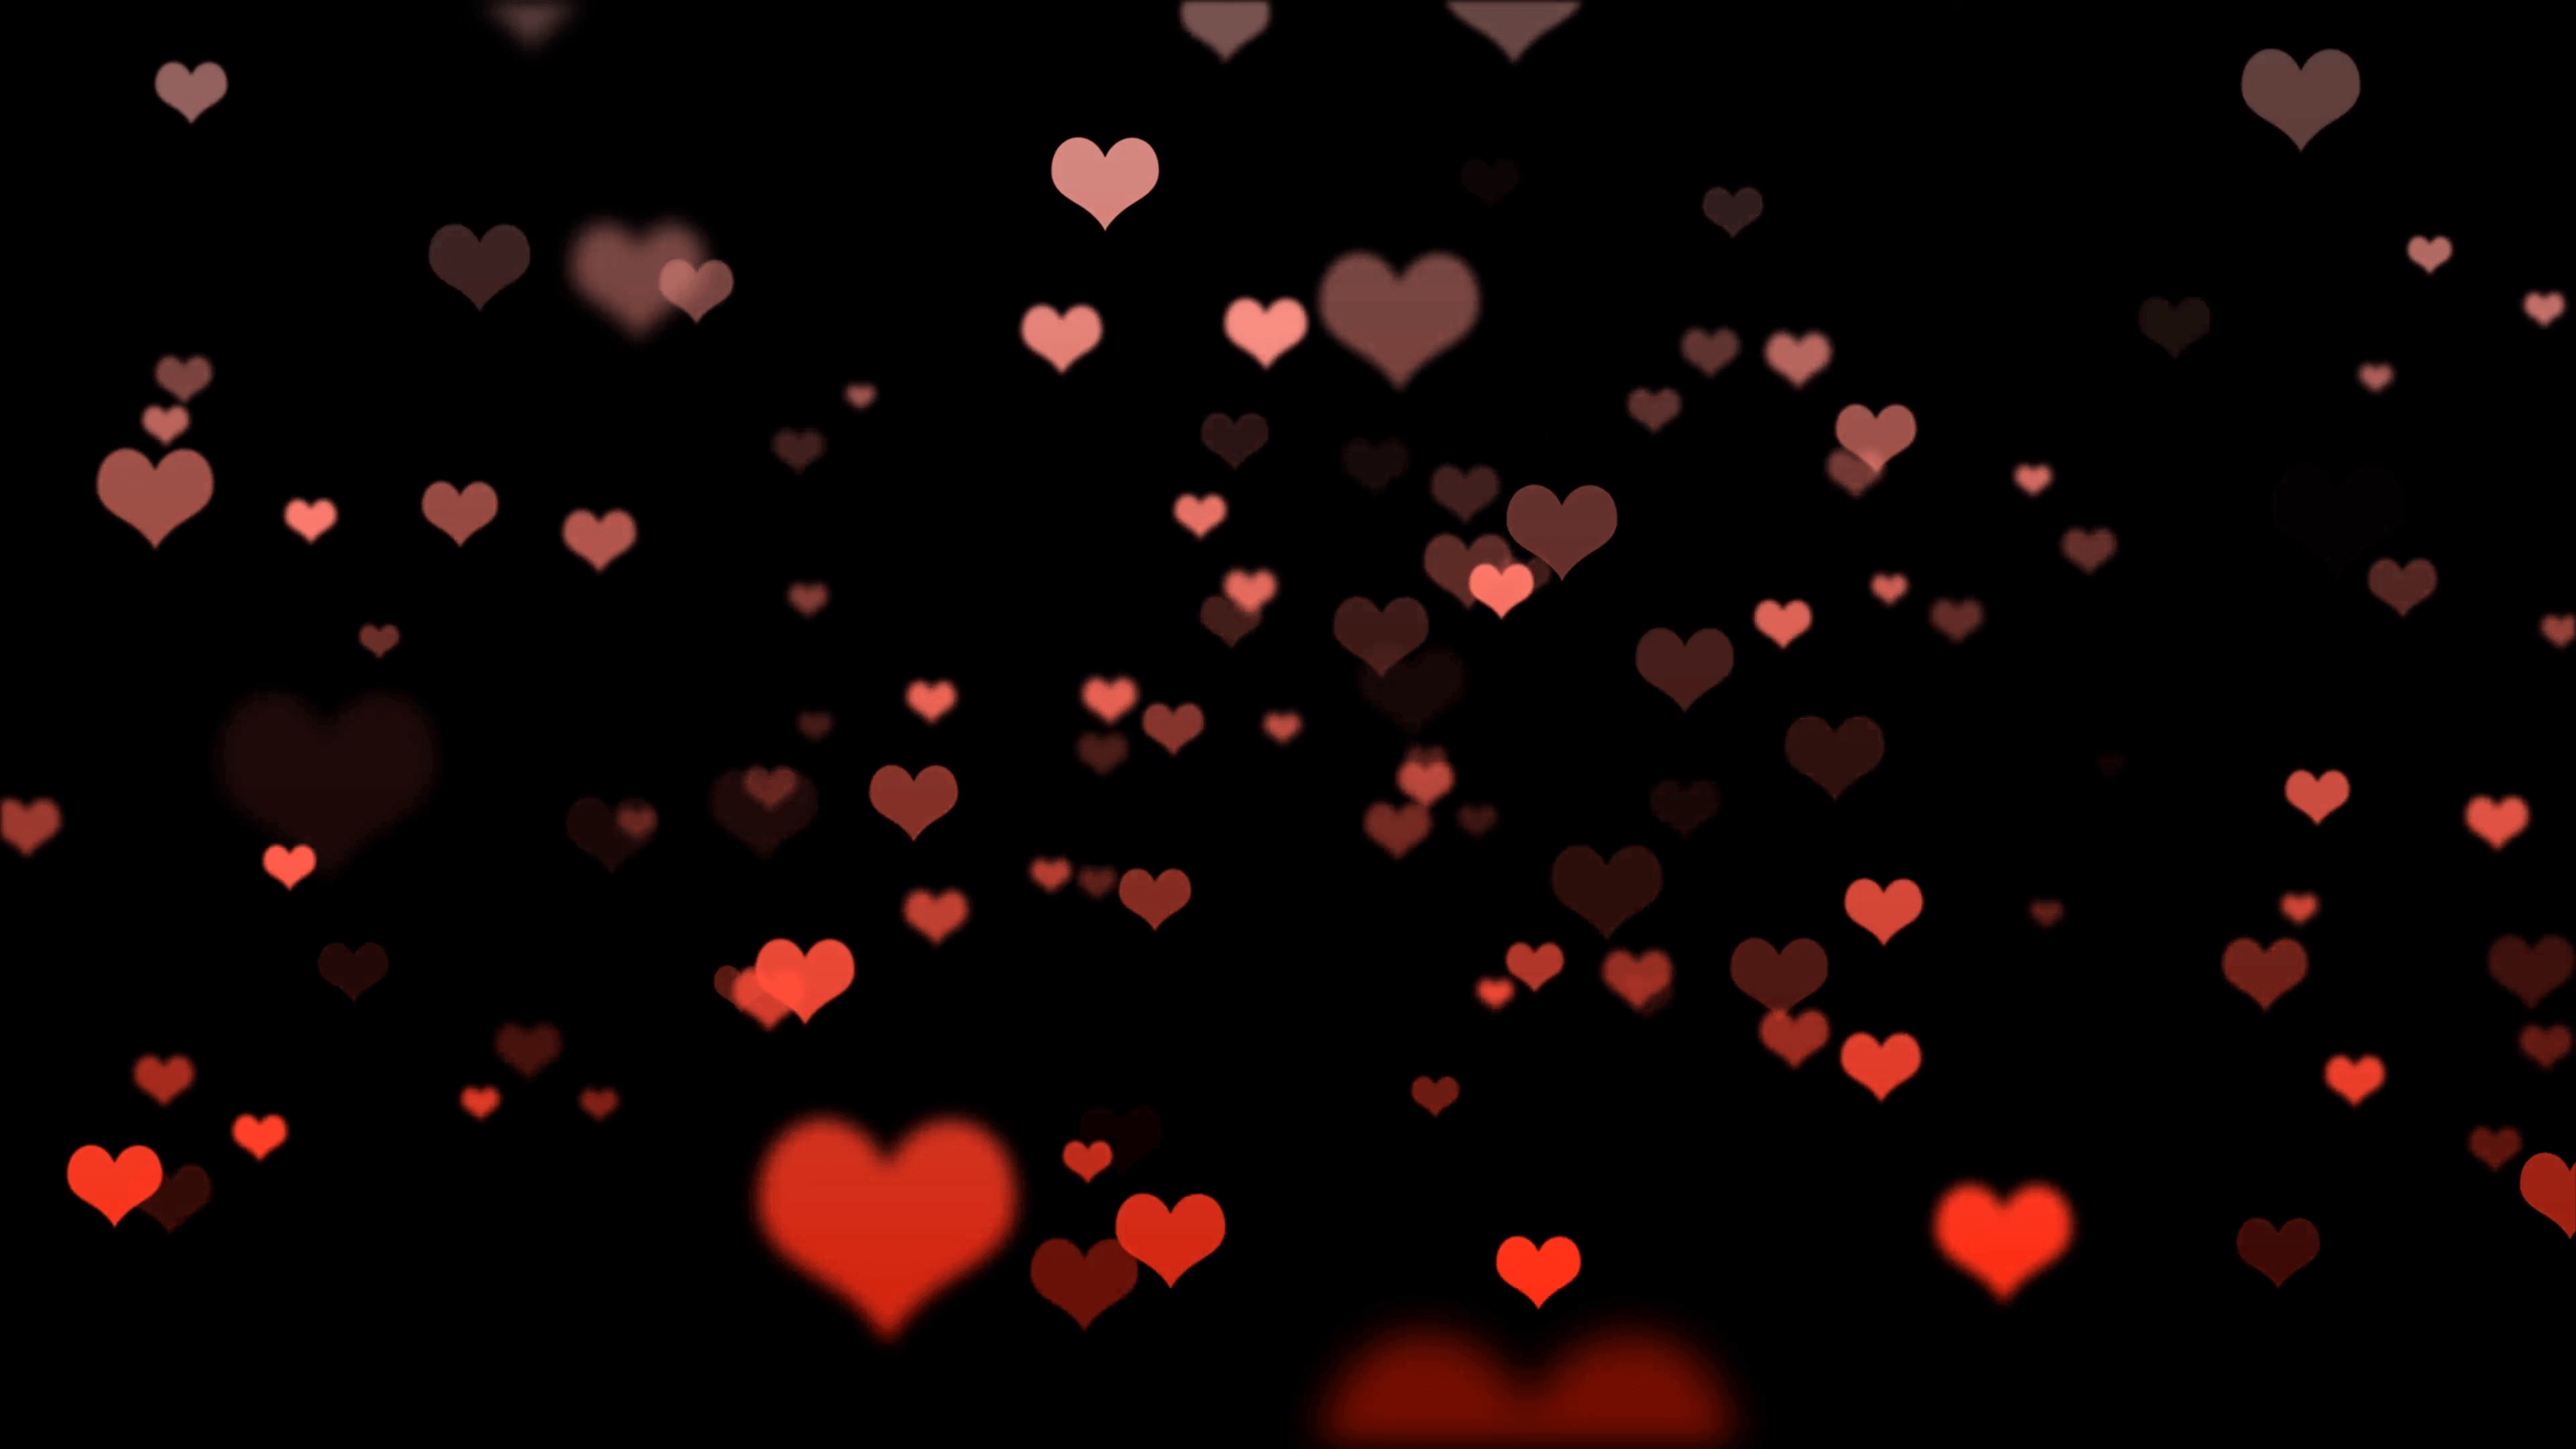 Red Hearts Black Backgrounds - Wallpaper Cave